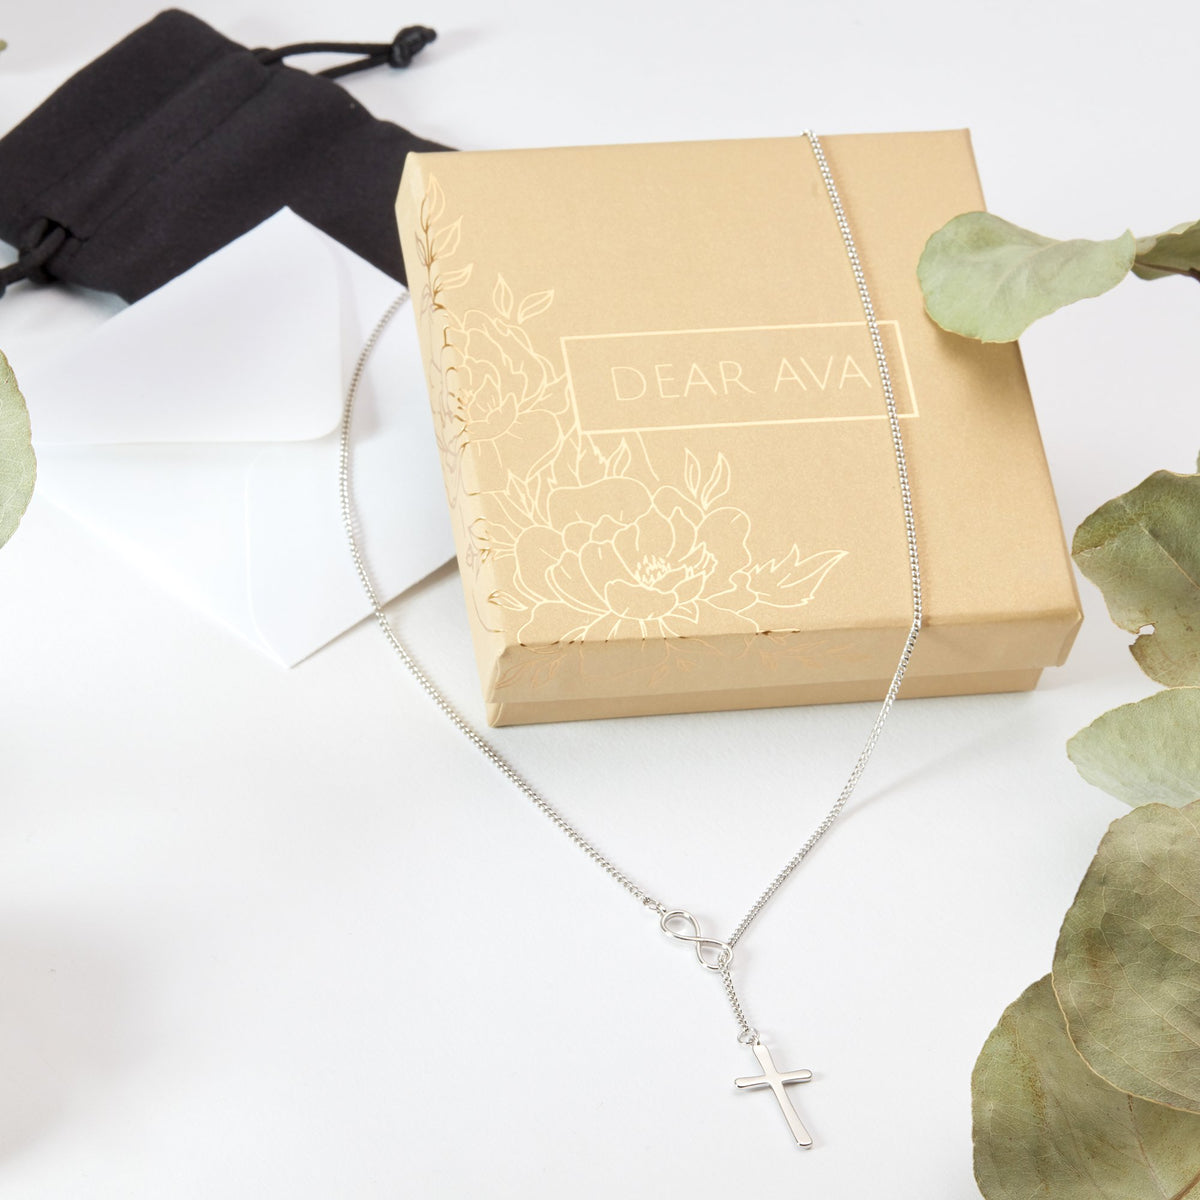 Mother and Son Infinity Cross  Necklace